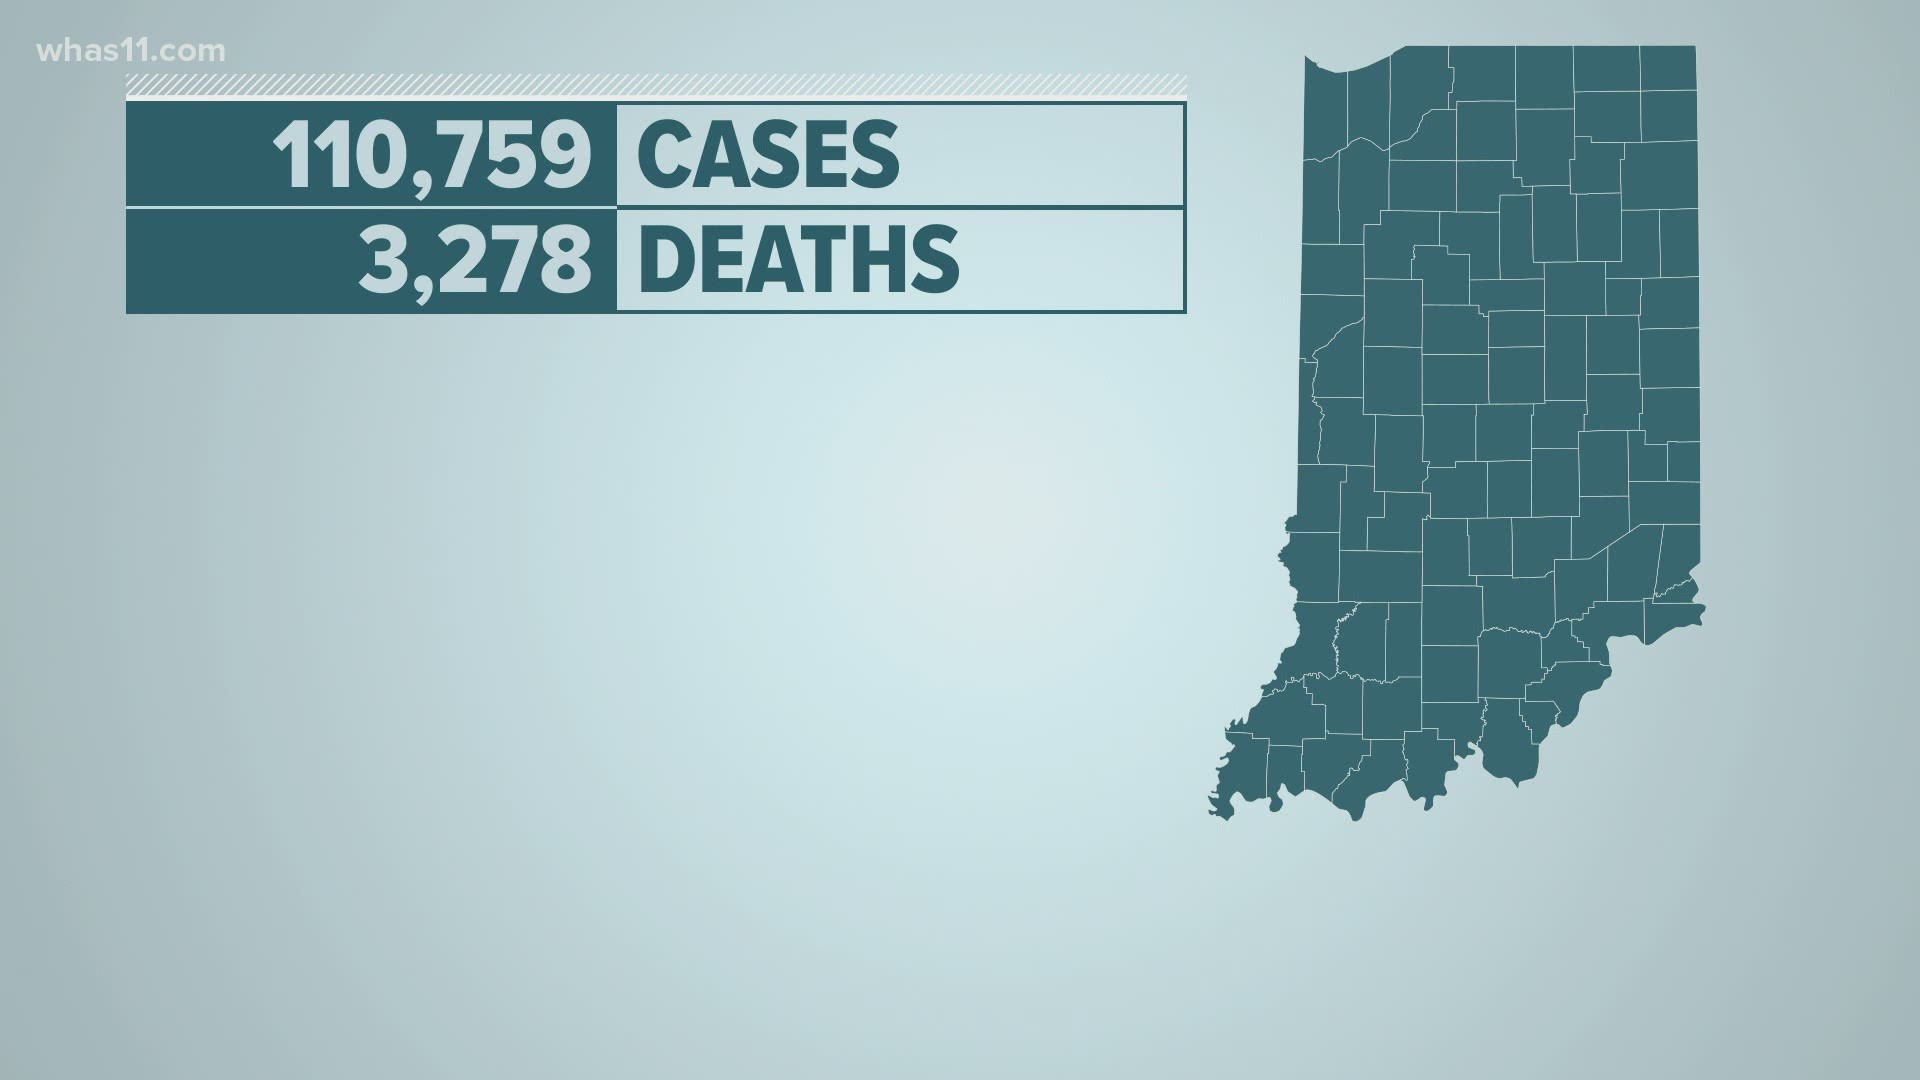 Indiana has more than a 110,000 positive cases since the outbreak and nine new deahs.